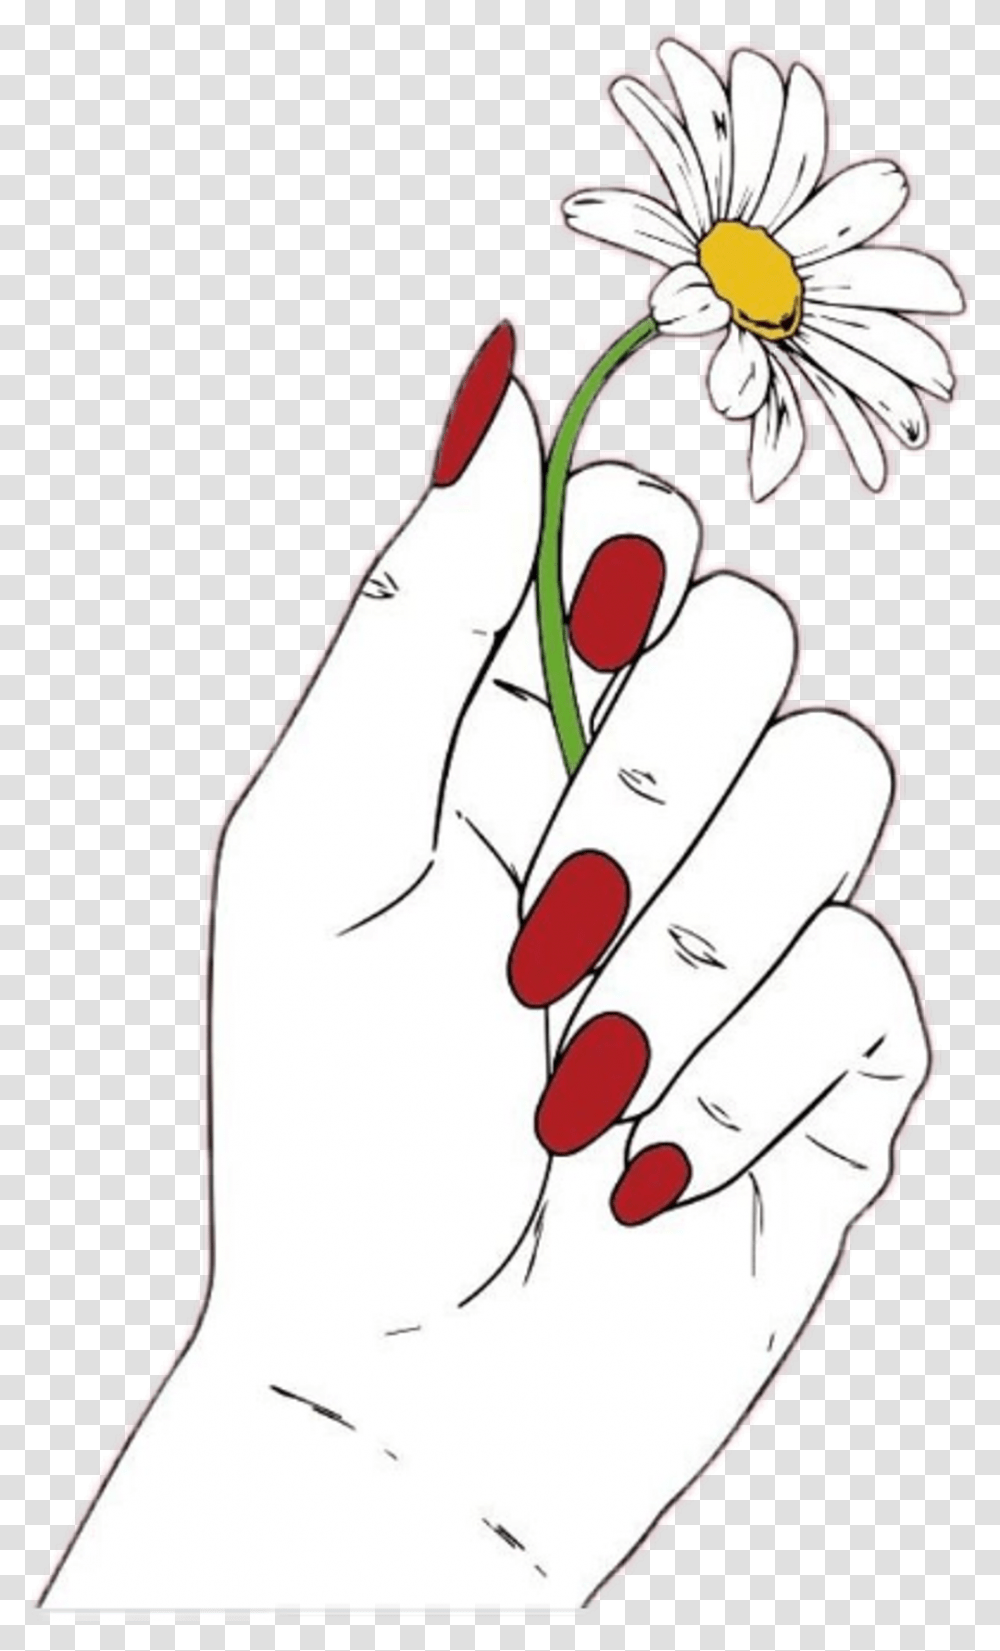 Drawing Of Hands Holding Flowers Drawing Of Hands Holding A Flower, Plant, Blossom, Daisy, Daisies Transparent Png